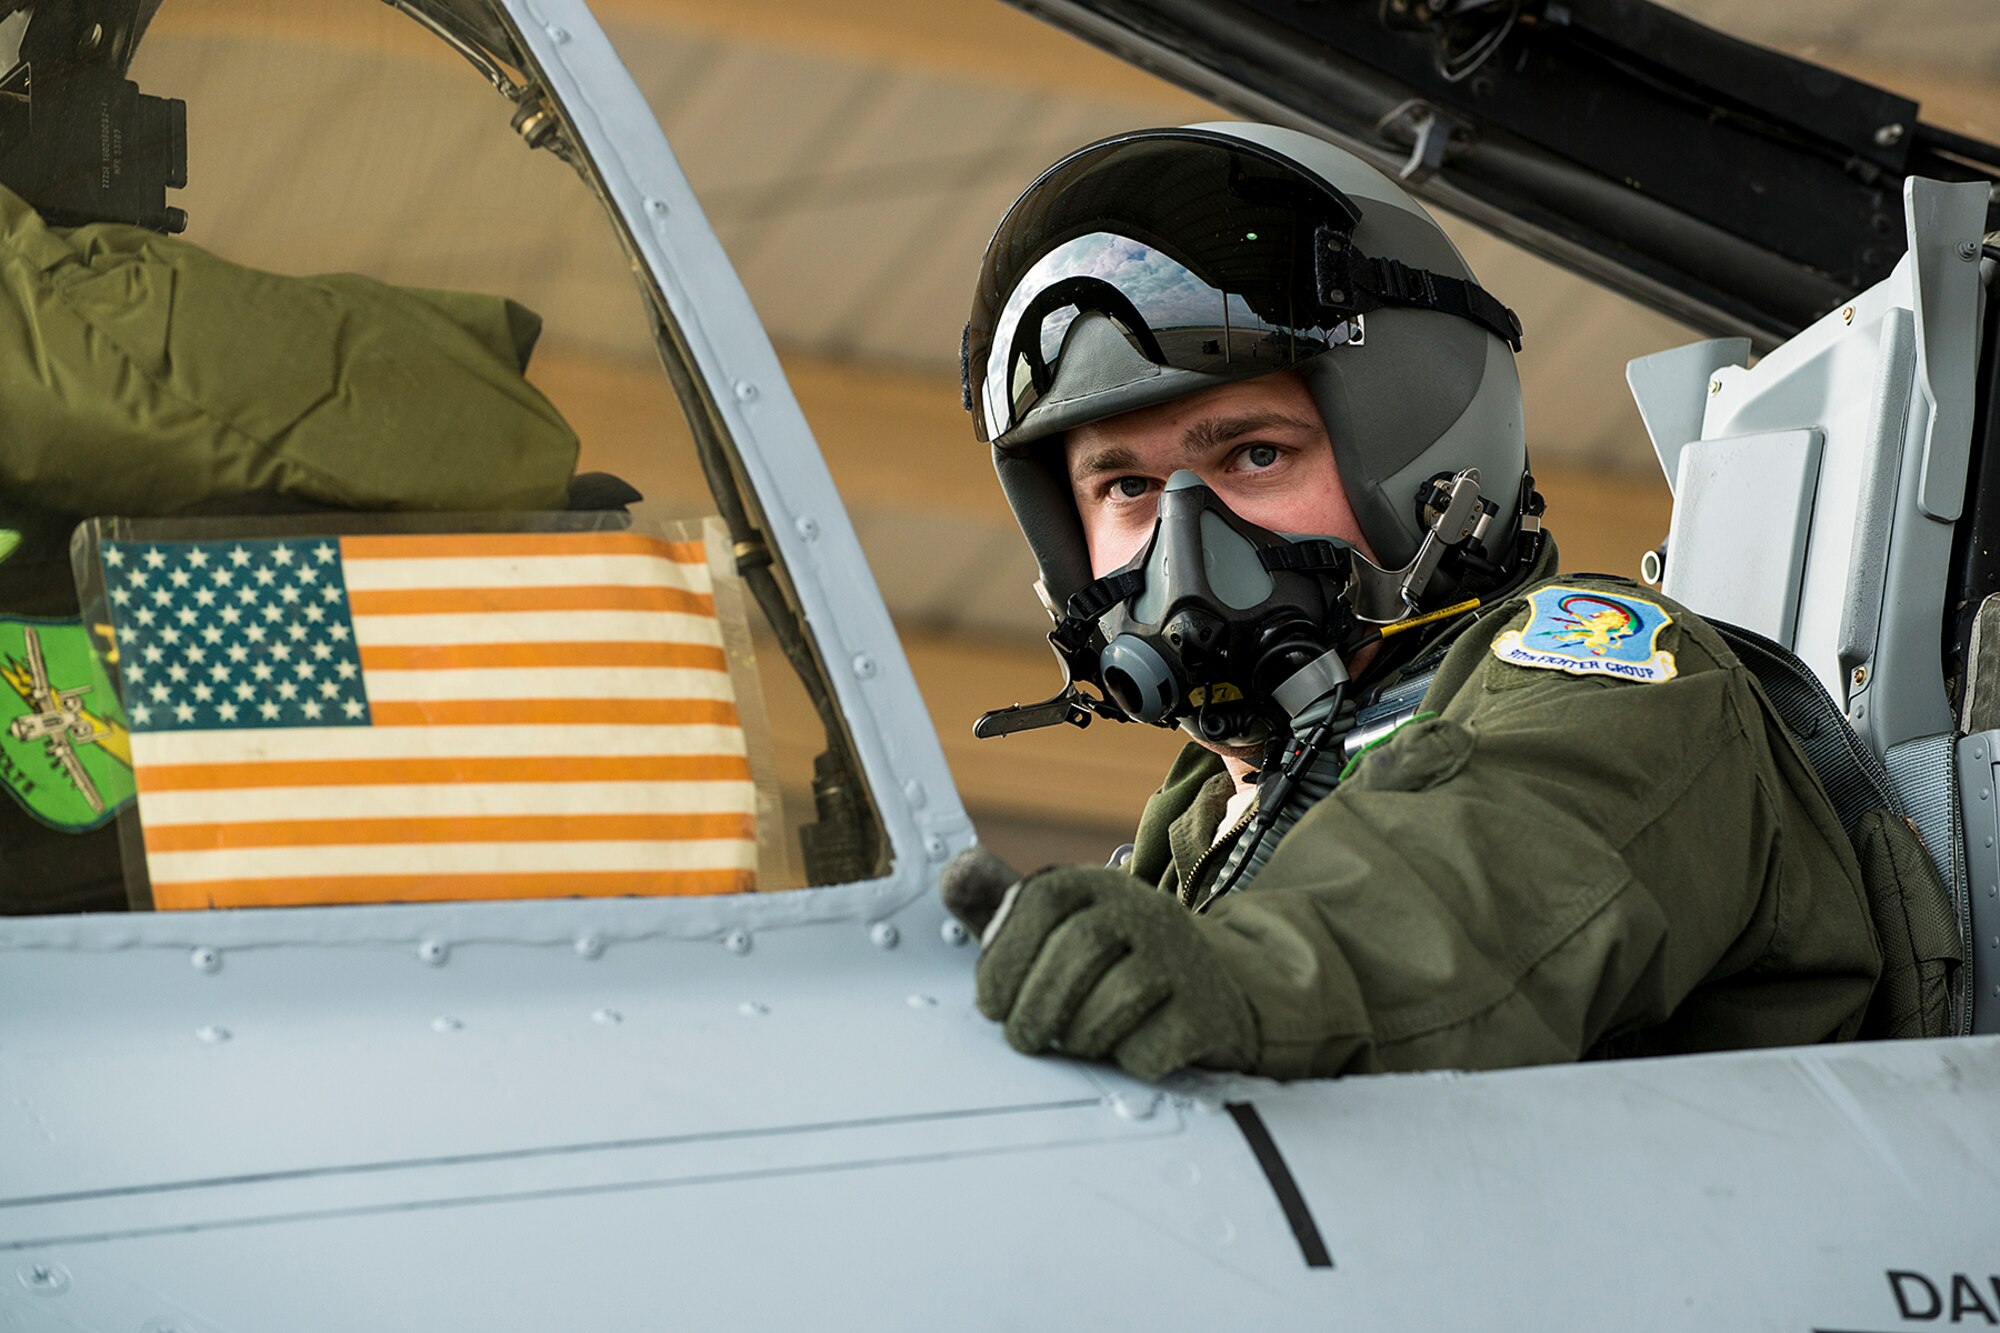 U.S. Air Force Capt. Simon Long, 47th Fighter Squadron pilot, prepares to taxi for a sortie, April 8, 2013, Barksdale Air Force Base, La. The A-10 Thunderbolt II piloted by Long is among the first three selected to permanently leave Barksdale in preparation of the inactivation of the 917th Fighter Group. (U.S. Air Force photo by Master Sgt. Greg Steele/Released)